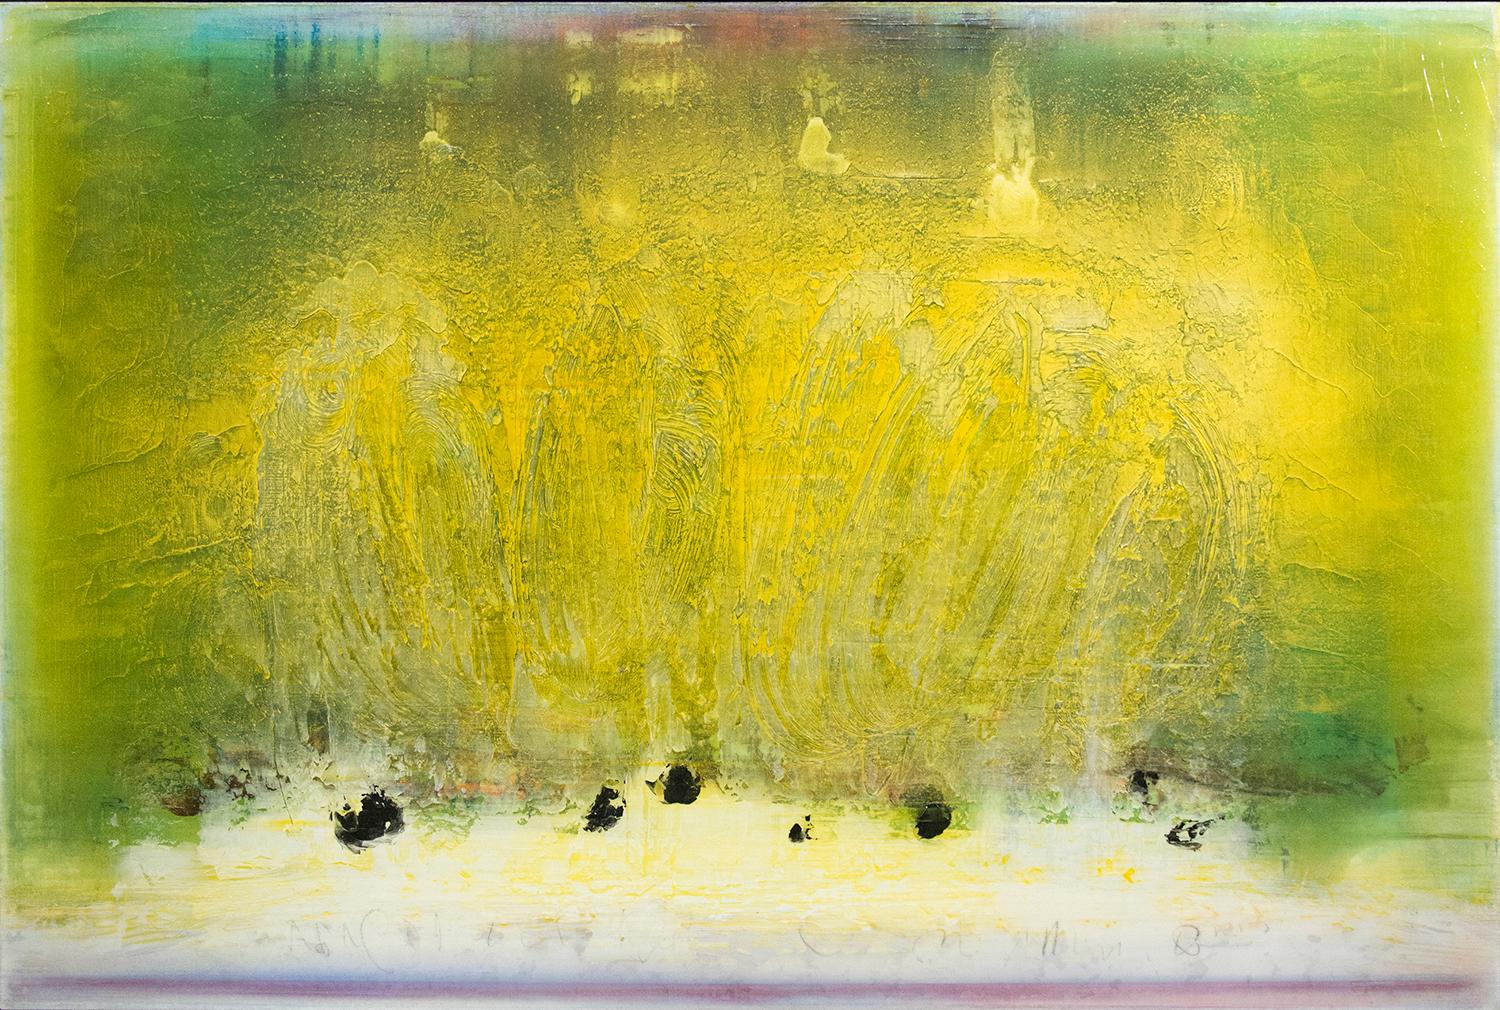 Alice Teichert Abstract Painting - Summer Works - warm, bright, yellow, gestural abstract, acrylic on canvas